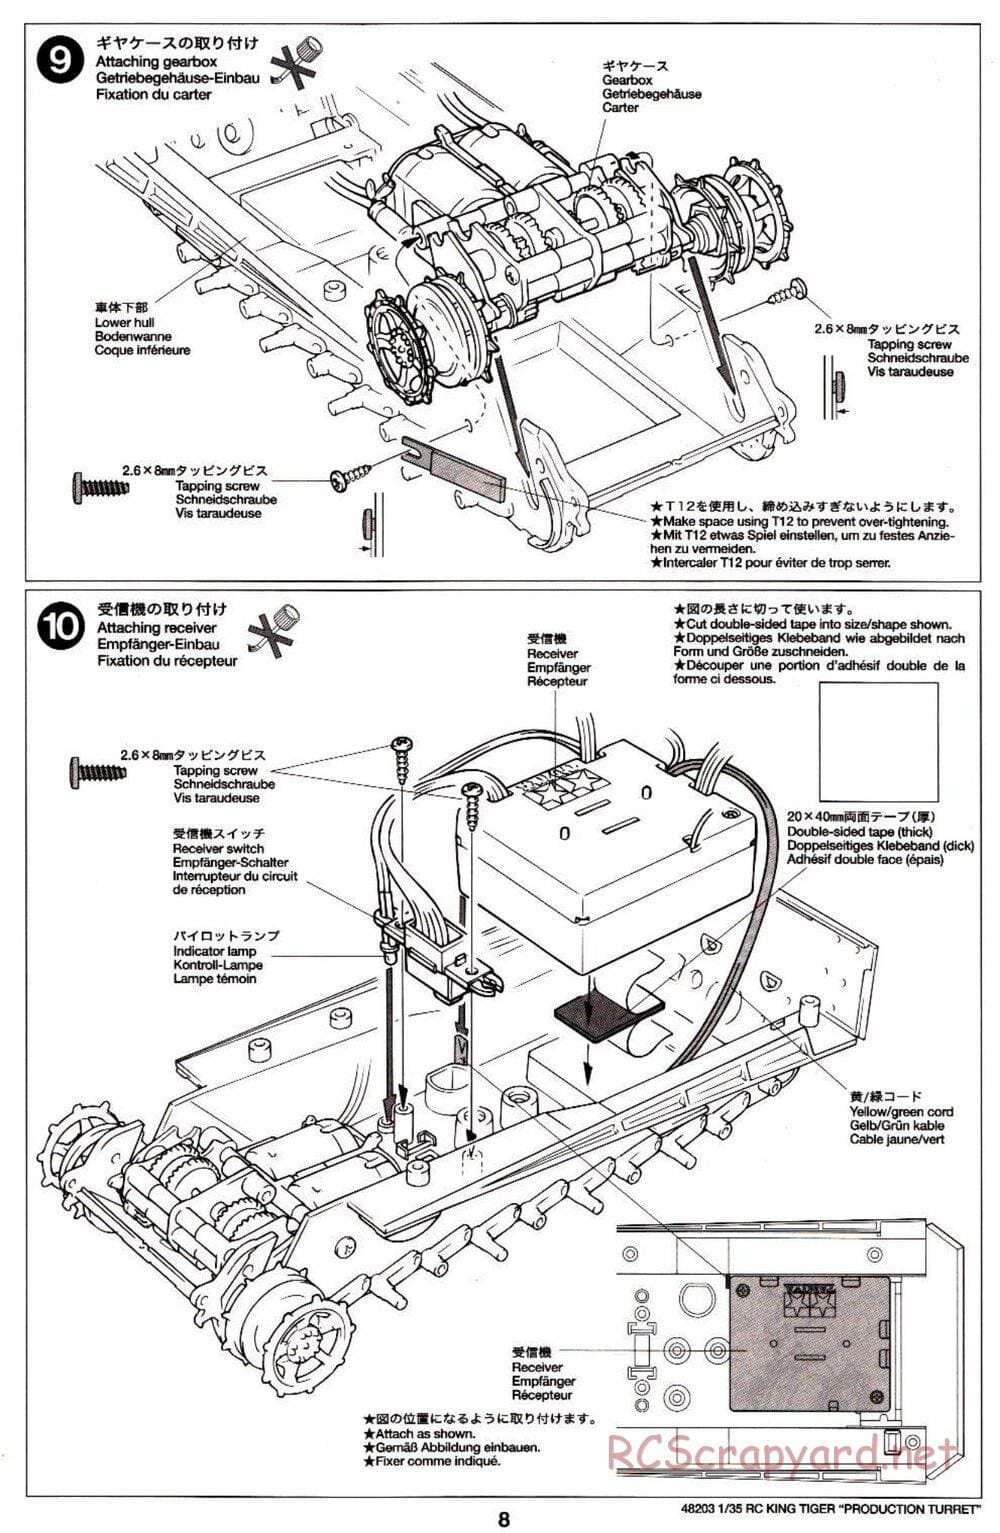 Tamiya - German King Tiger (Production Turret) - 1/35 Scale Chassis - Manual - Page 8